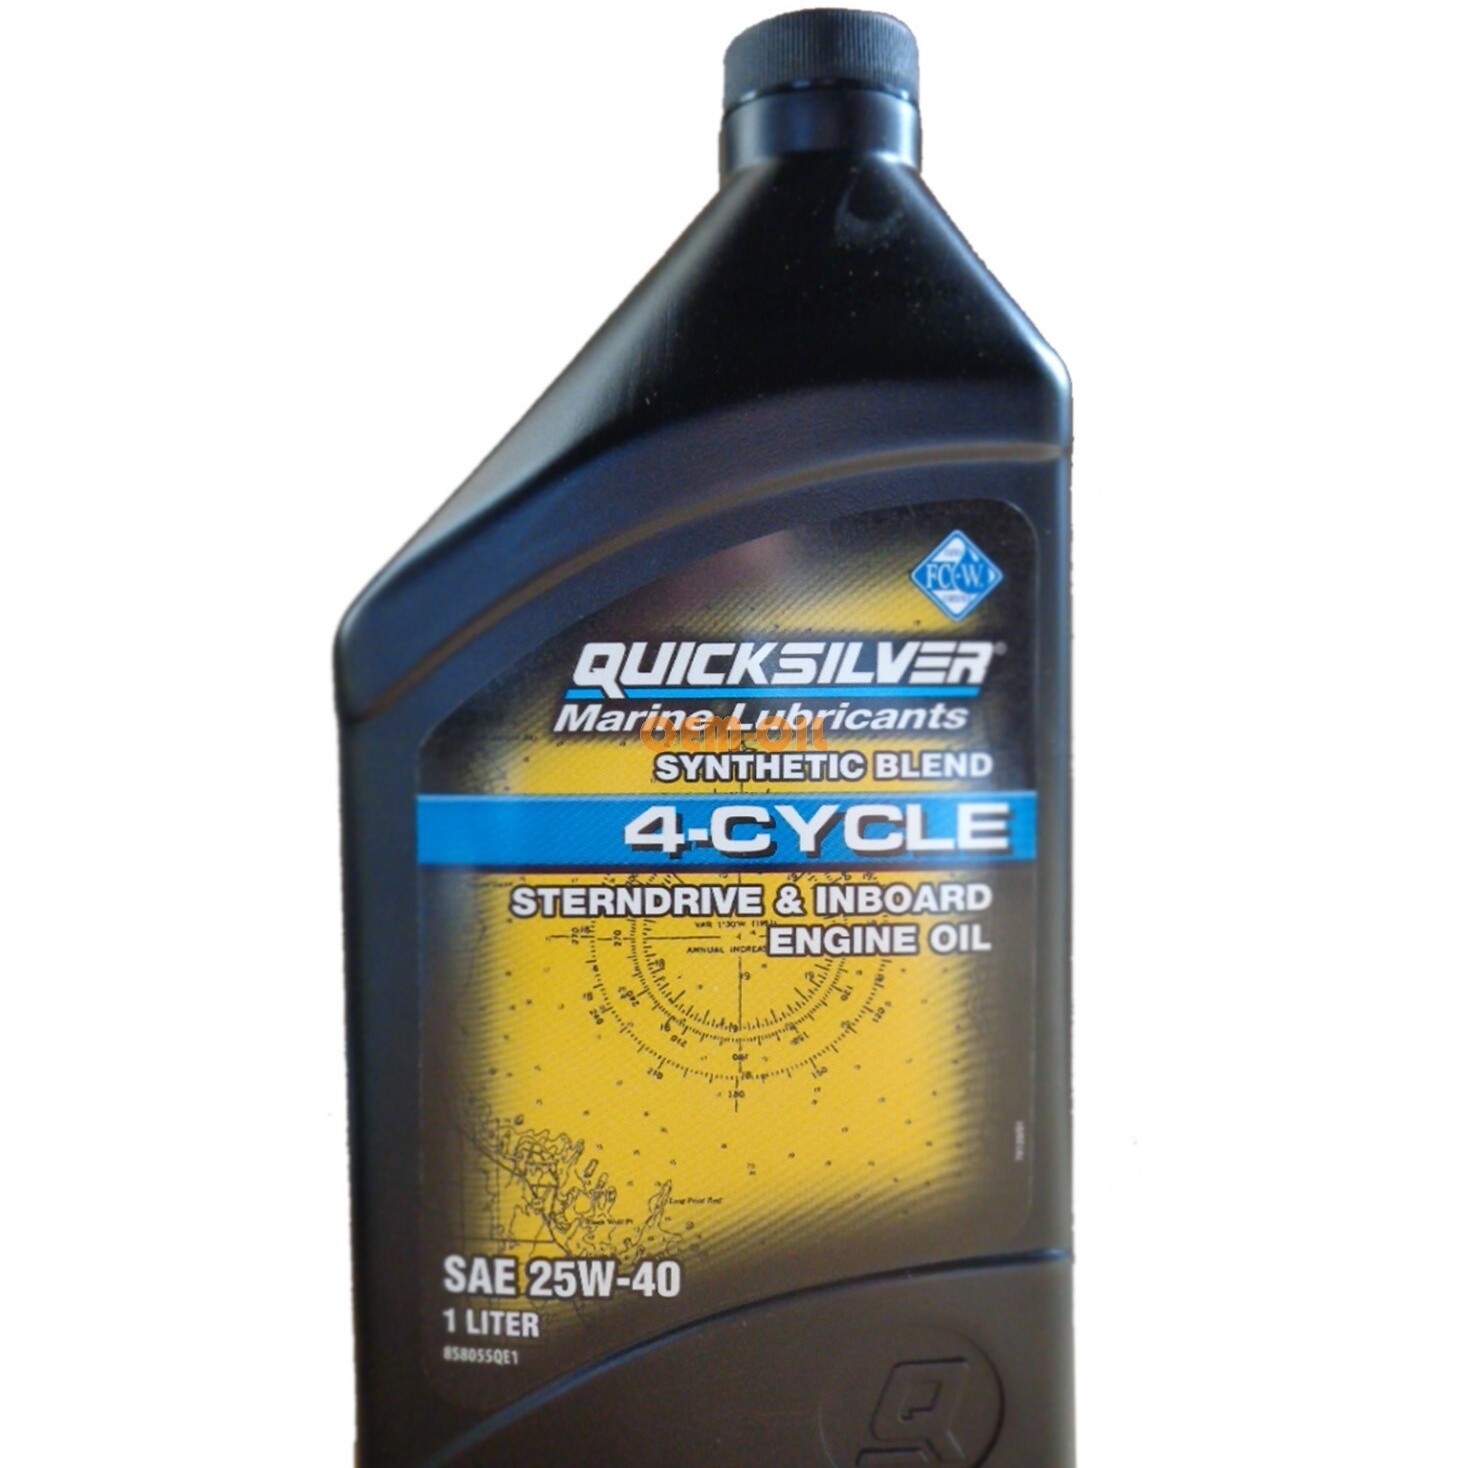 Synthetic Blend 4-Cycle Sterndrive & Inboard Engine Oil 1L